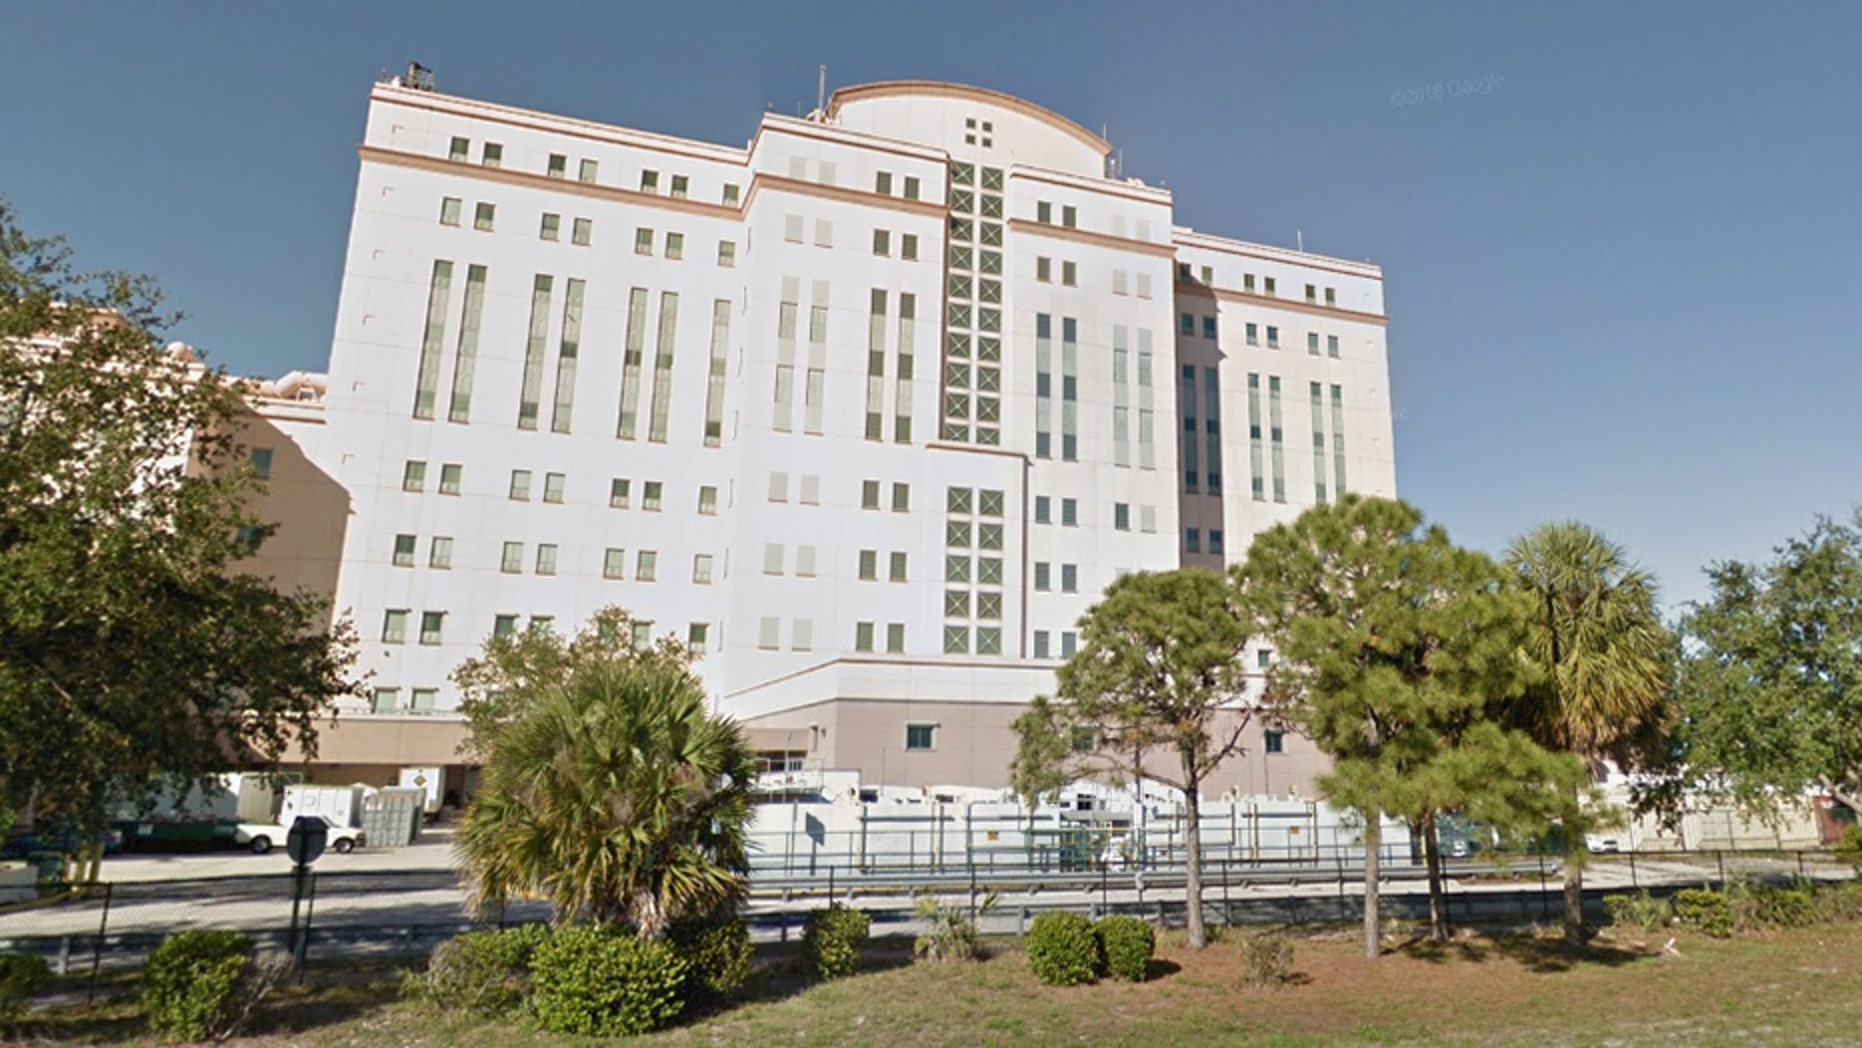 According to the FBI, Larry Ray Bon opened fire on Wednesday night at the VA Medical Center in Riviera Beach, Florida.